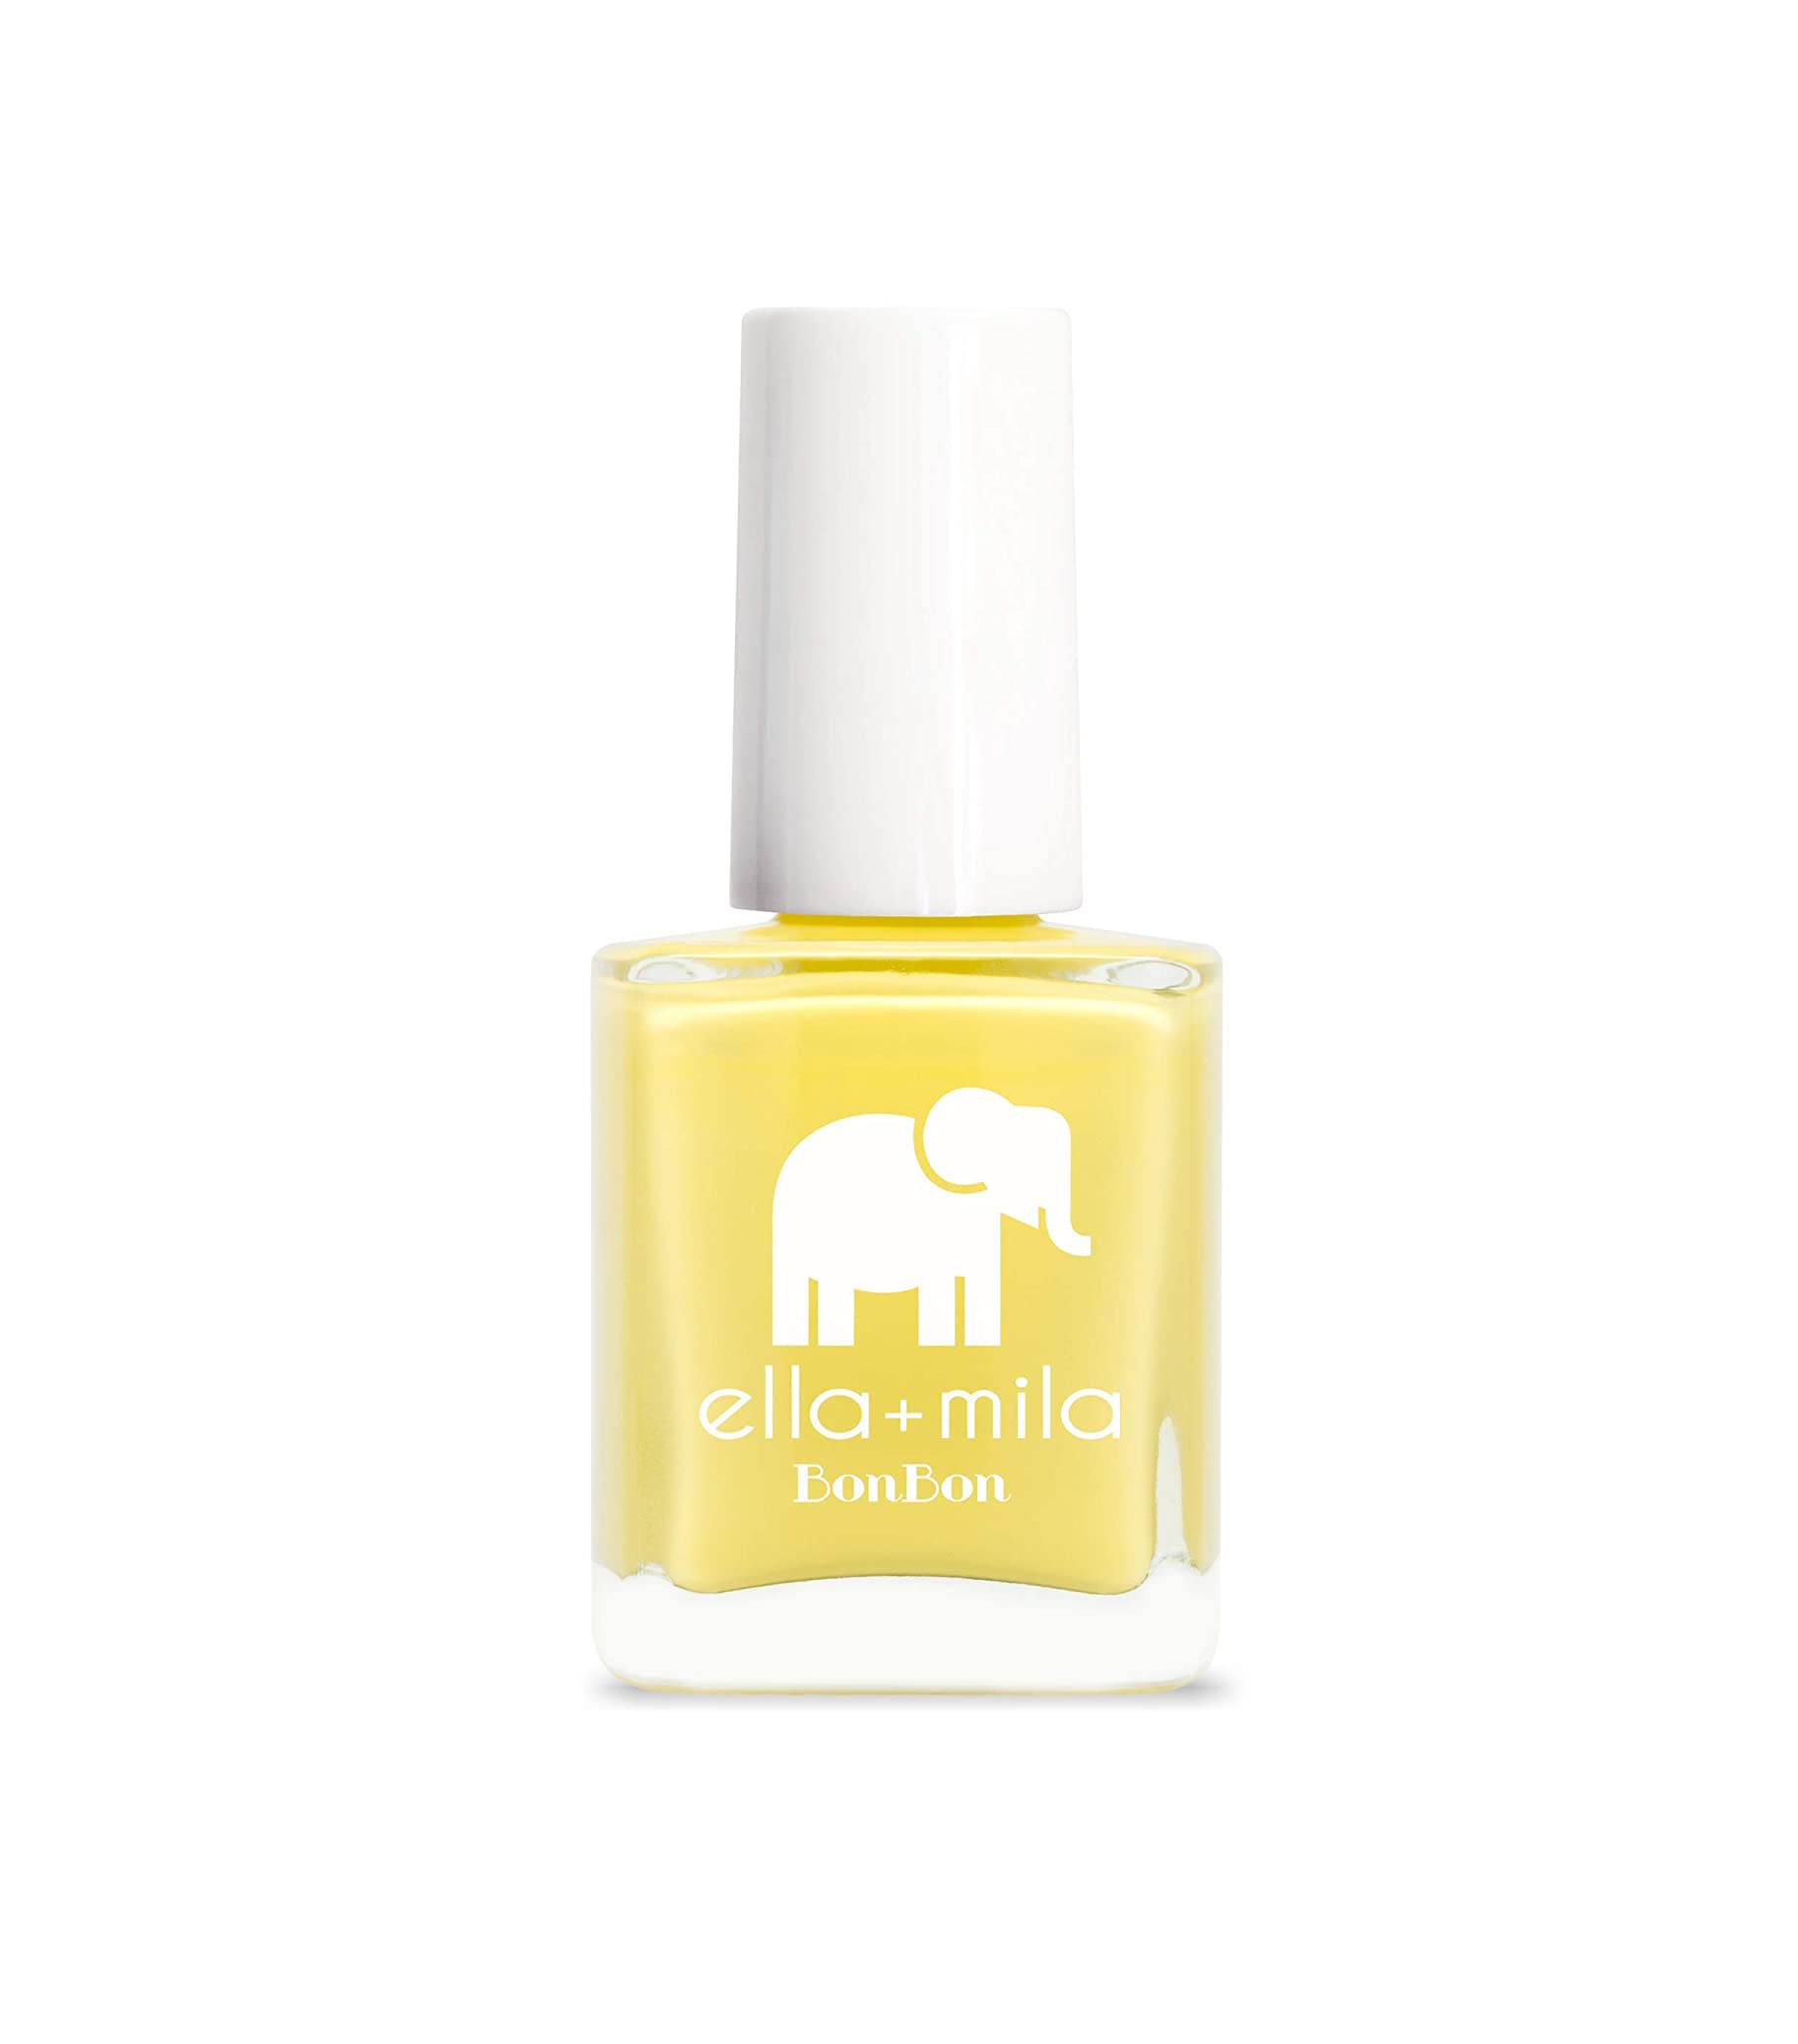 16 Best Yellow Nail Polishes for Your Next Manicure | Who What Wear